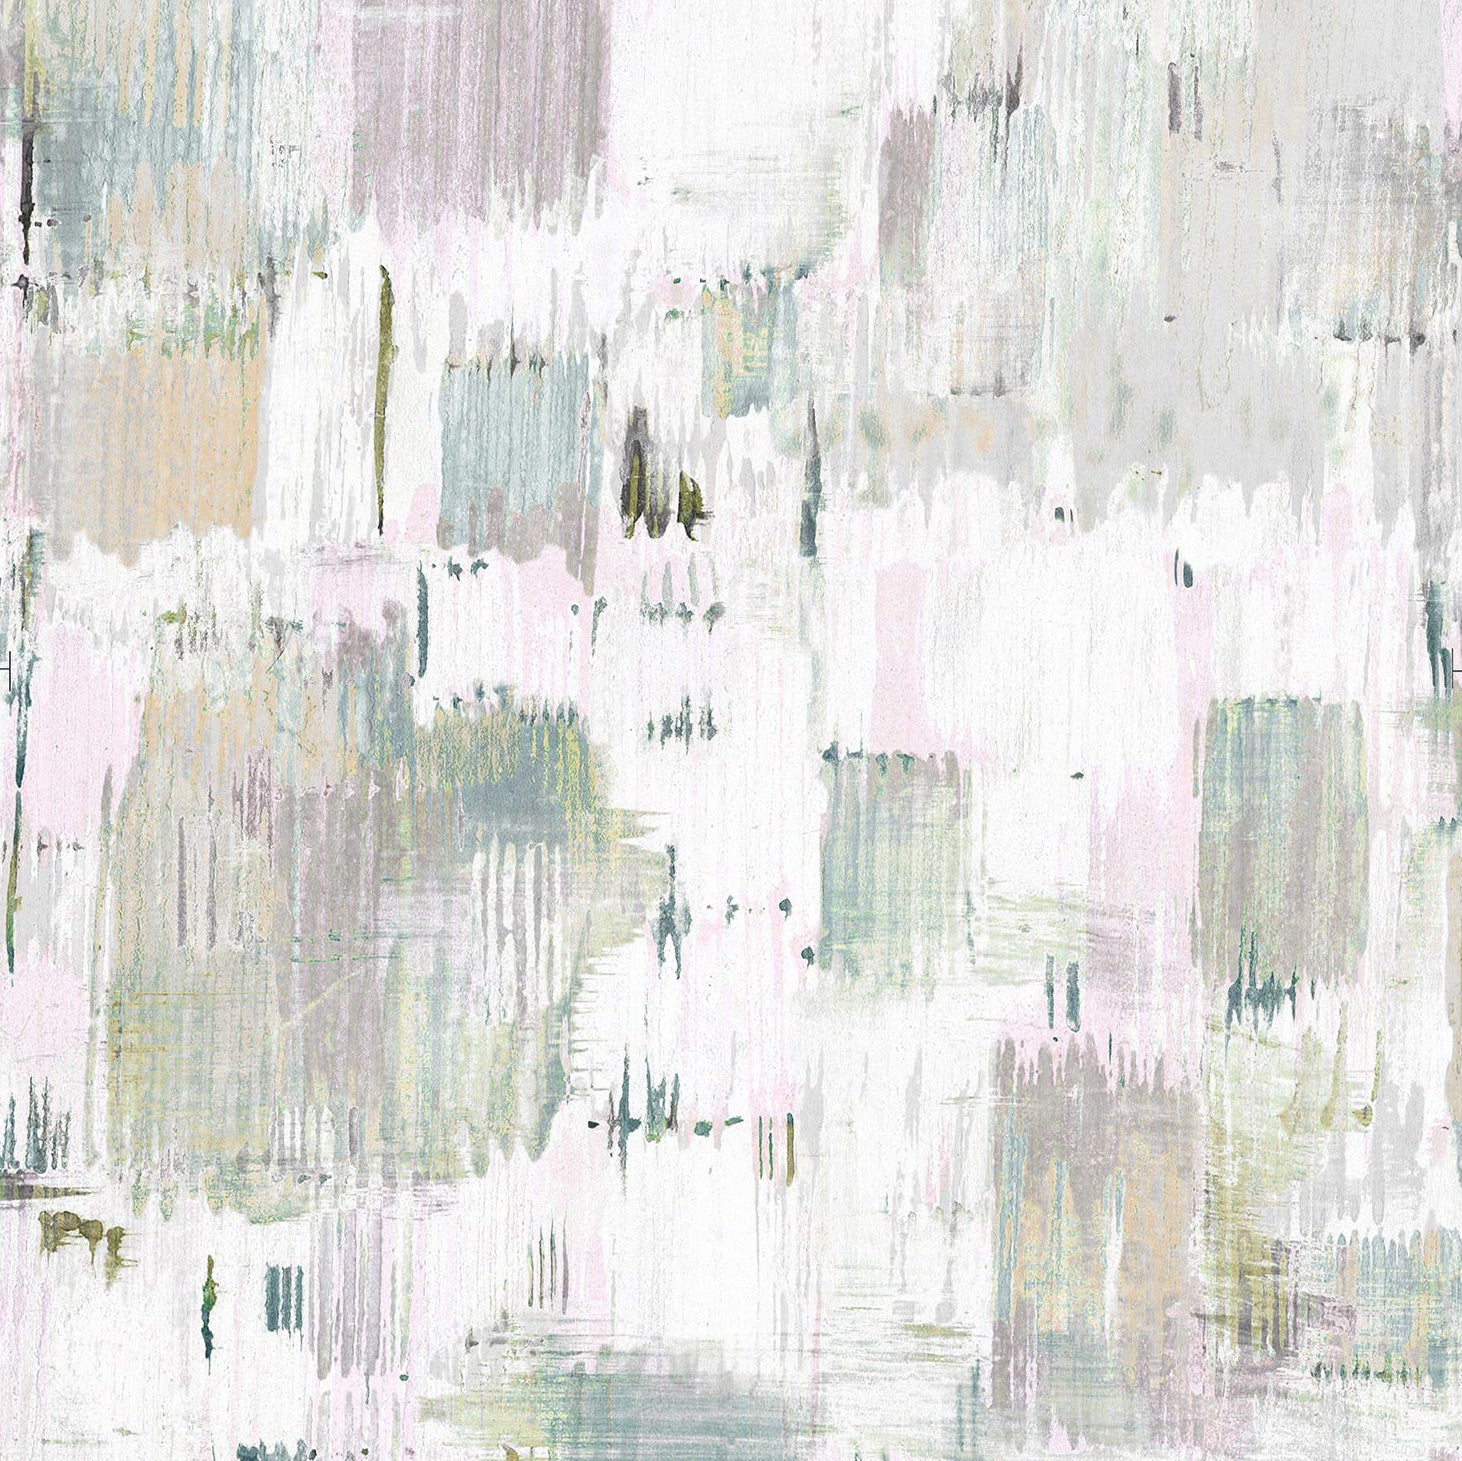 Detail of wallpaper in an abstract textural print in shades of green and pink on a white field.